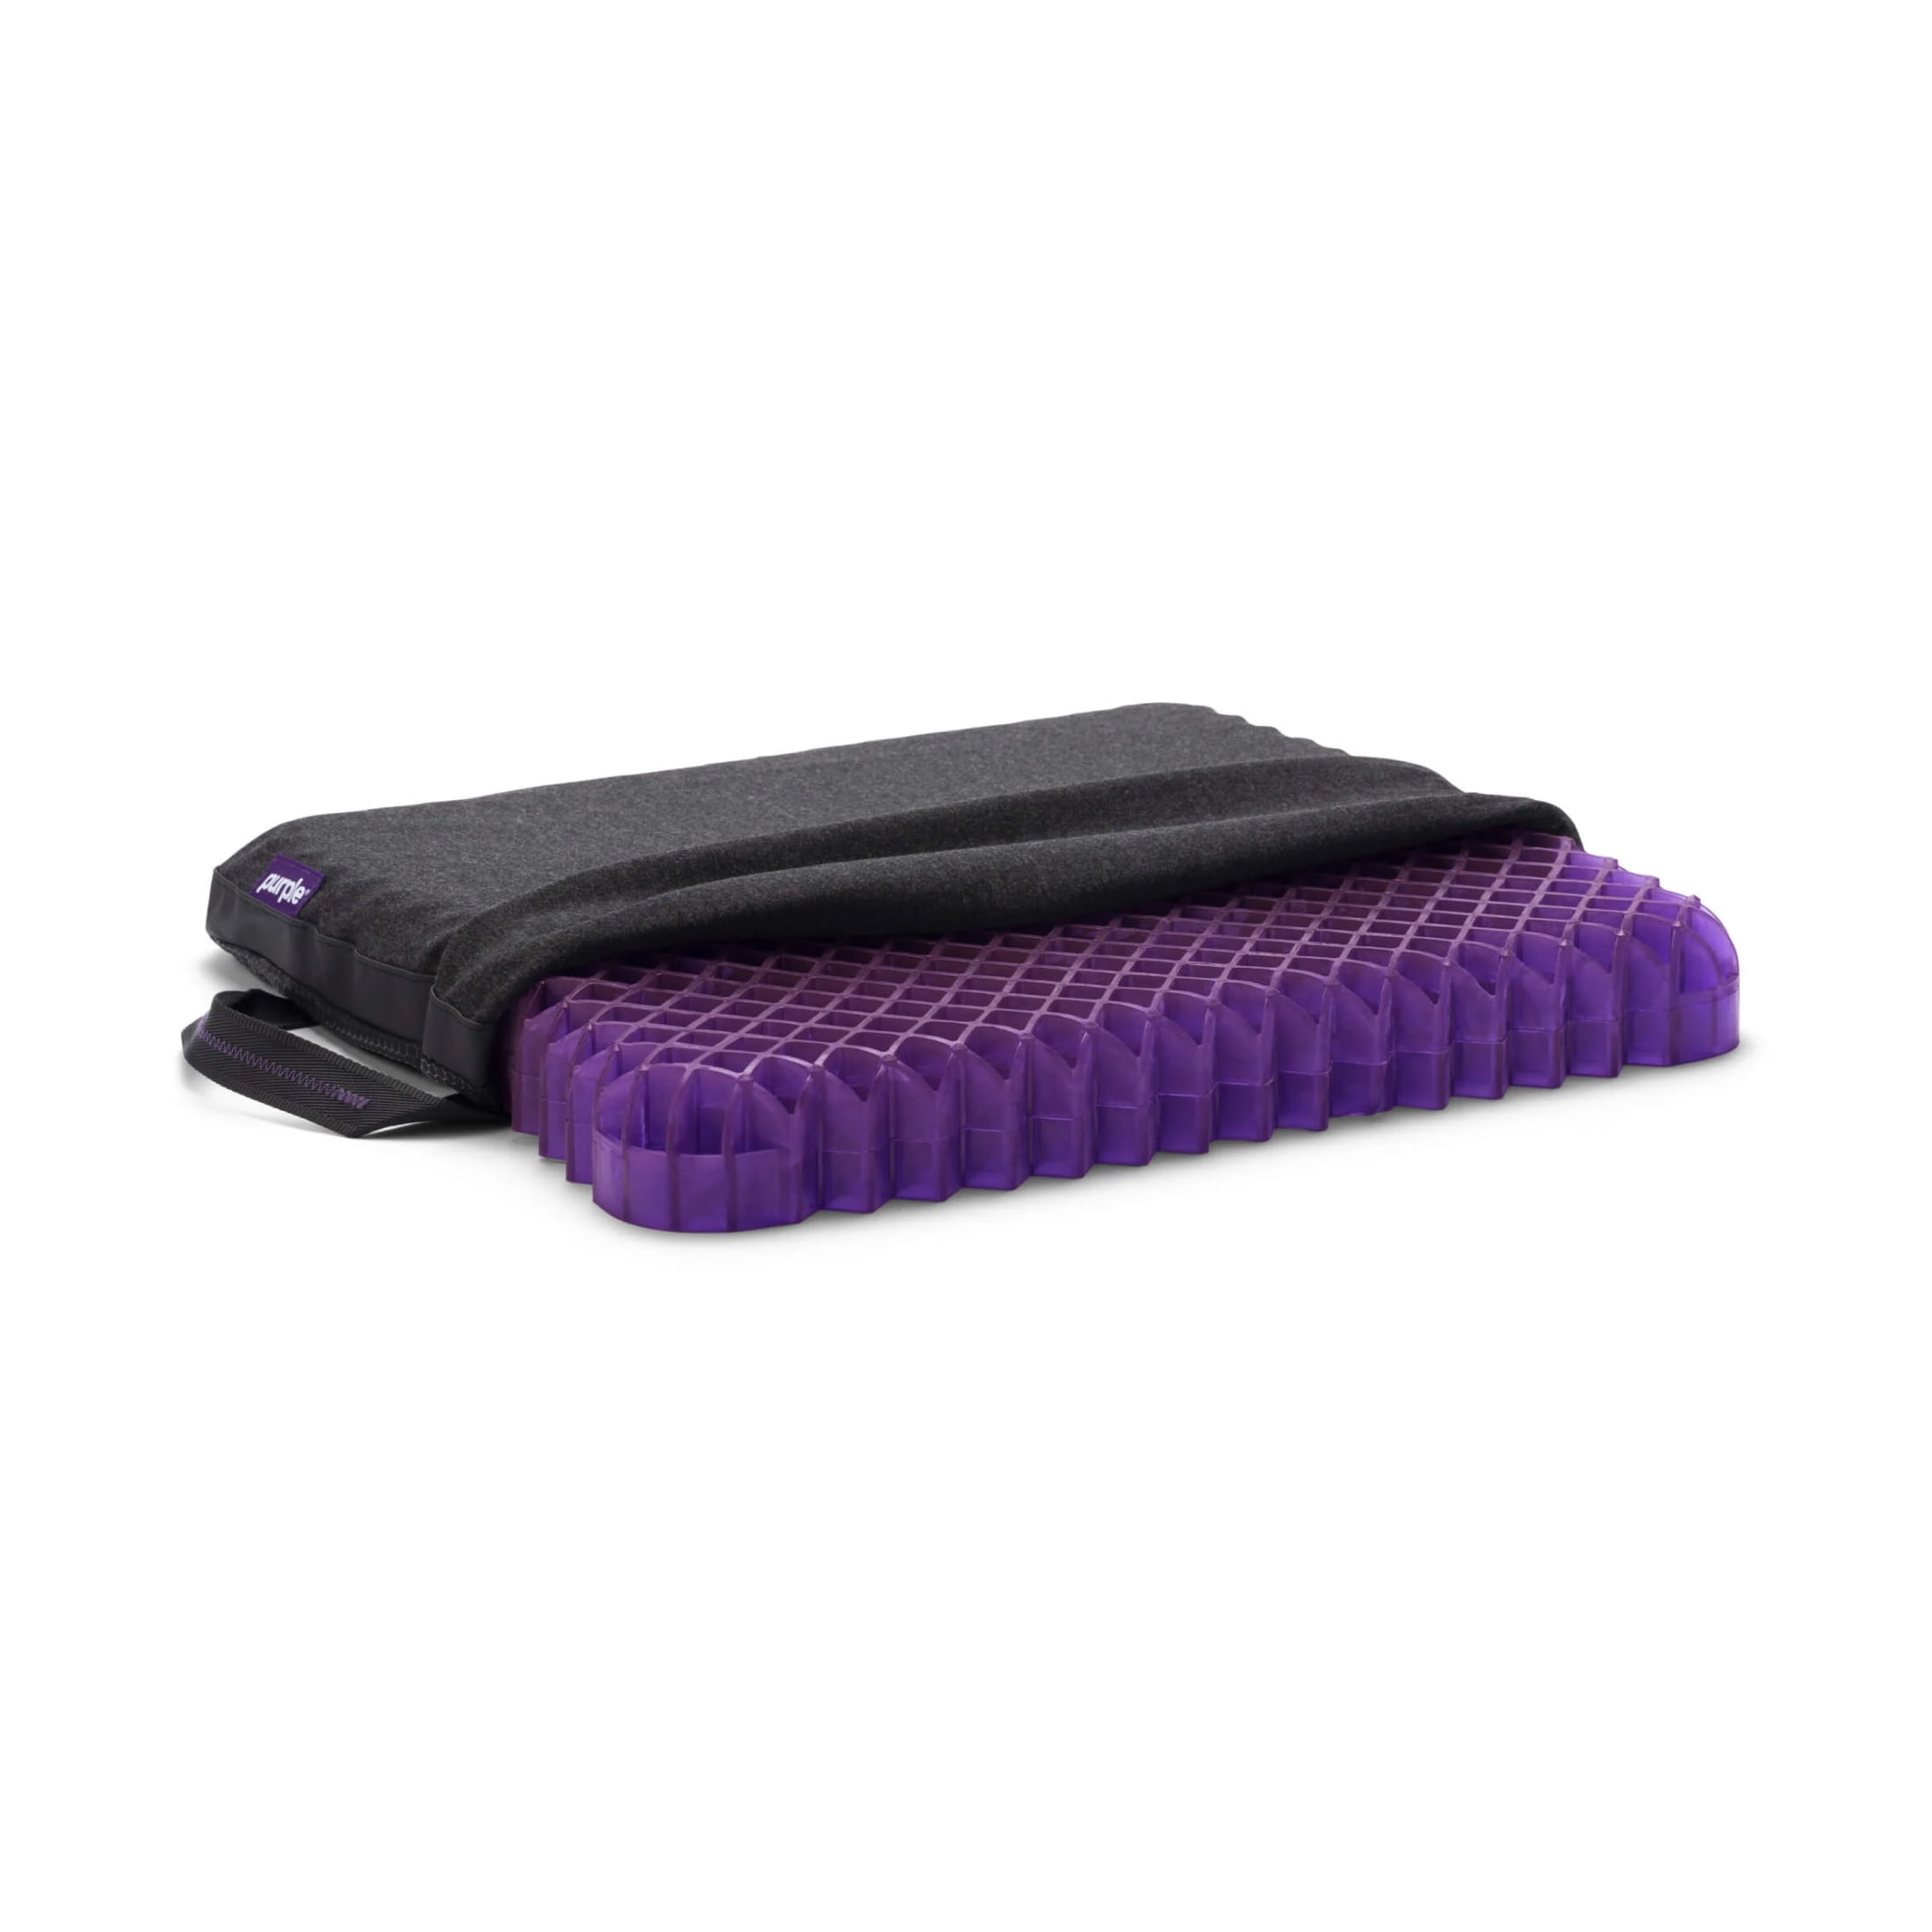 Purple Double Seat Cushion 18 x 16, Pressure Reducing GelFlex Grid, Ideal  for Soft or Hard Seats